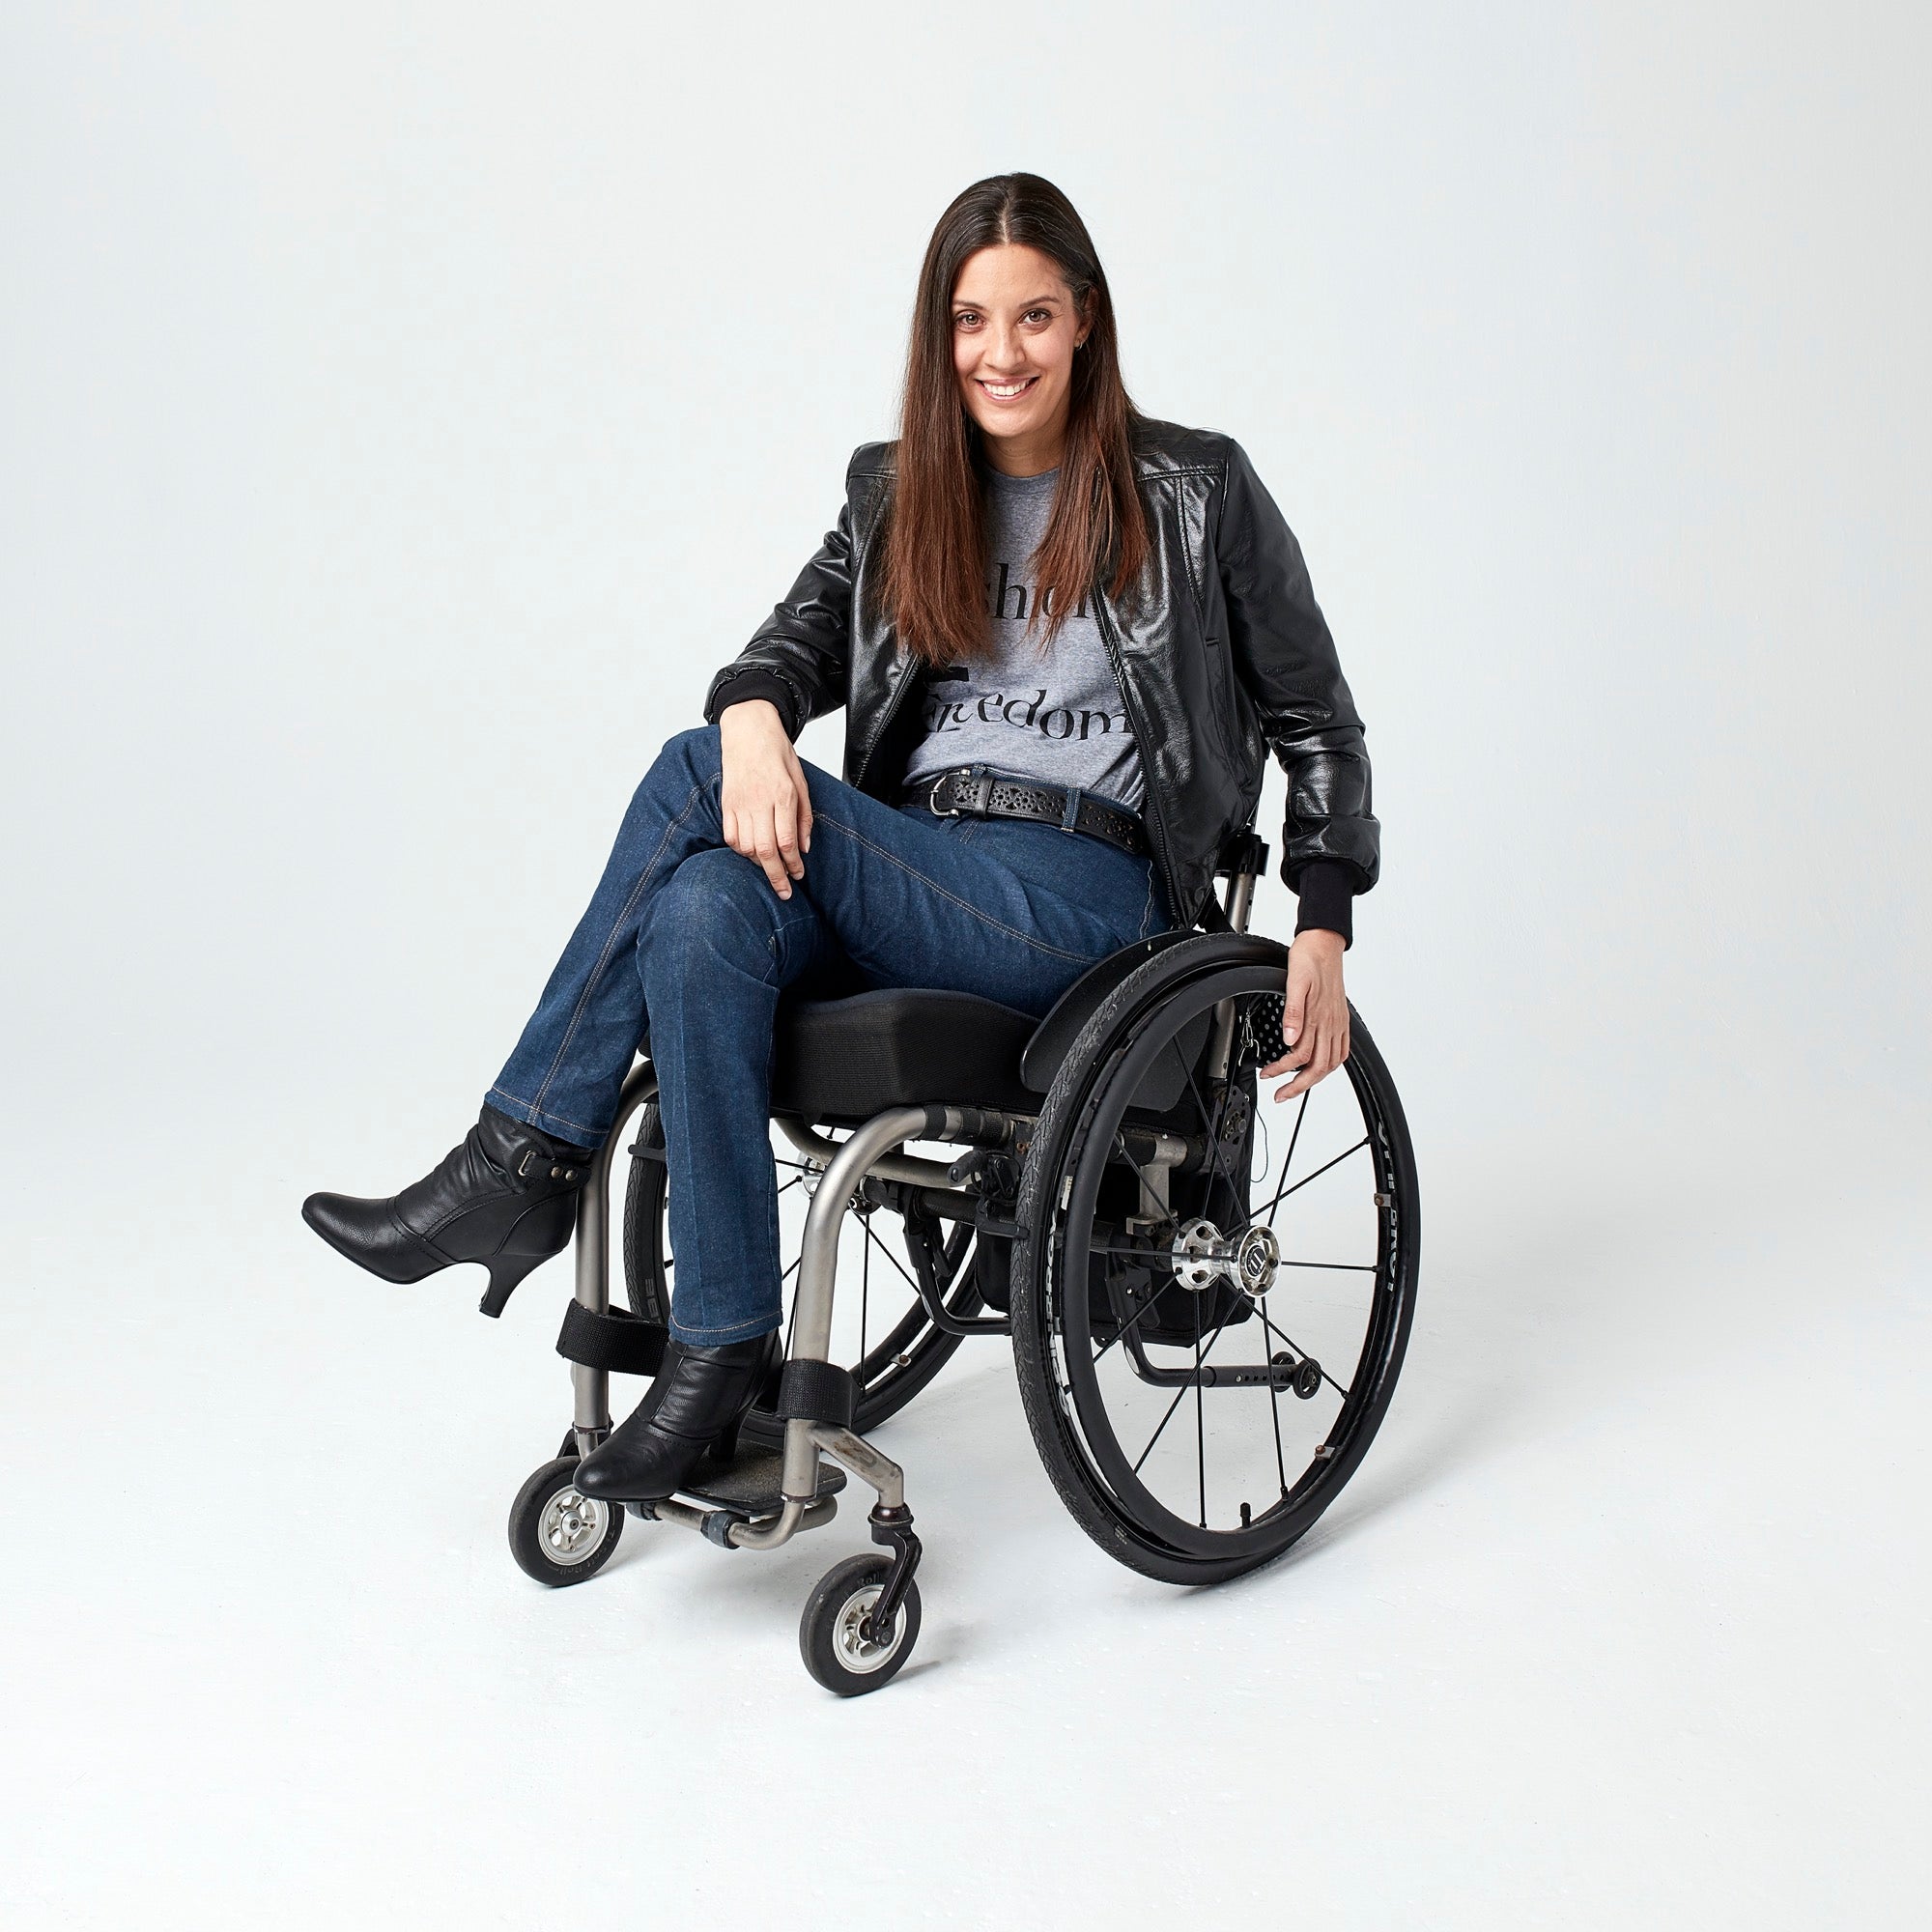 Adaptive clothing for women and men that is stylish and functional